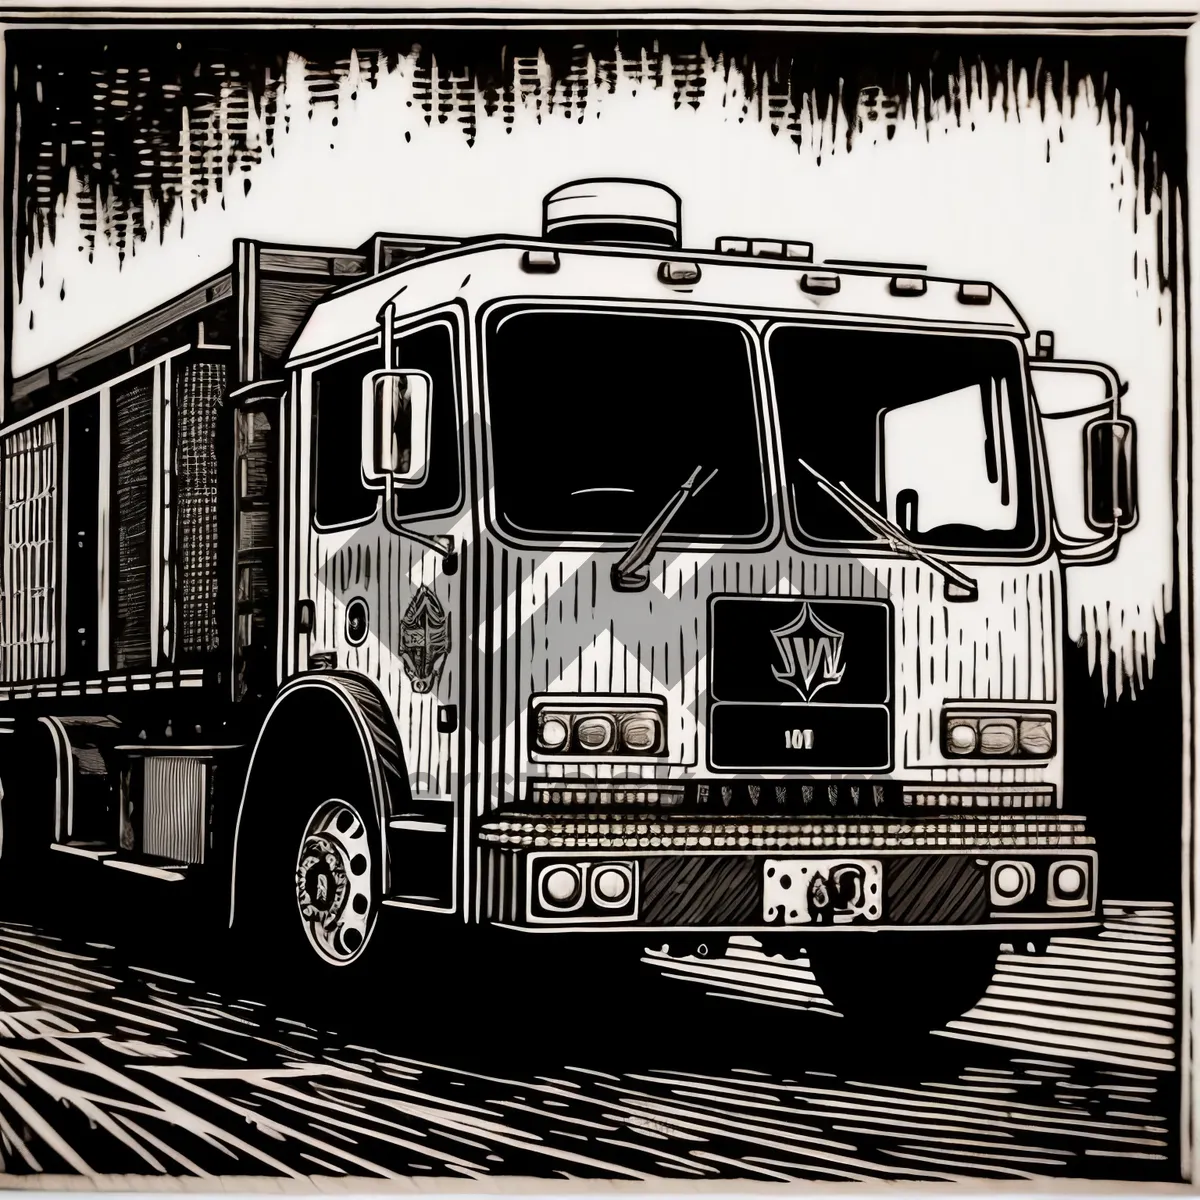 Picture of Transportation on Wheels: A Fire Engine on the Road.